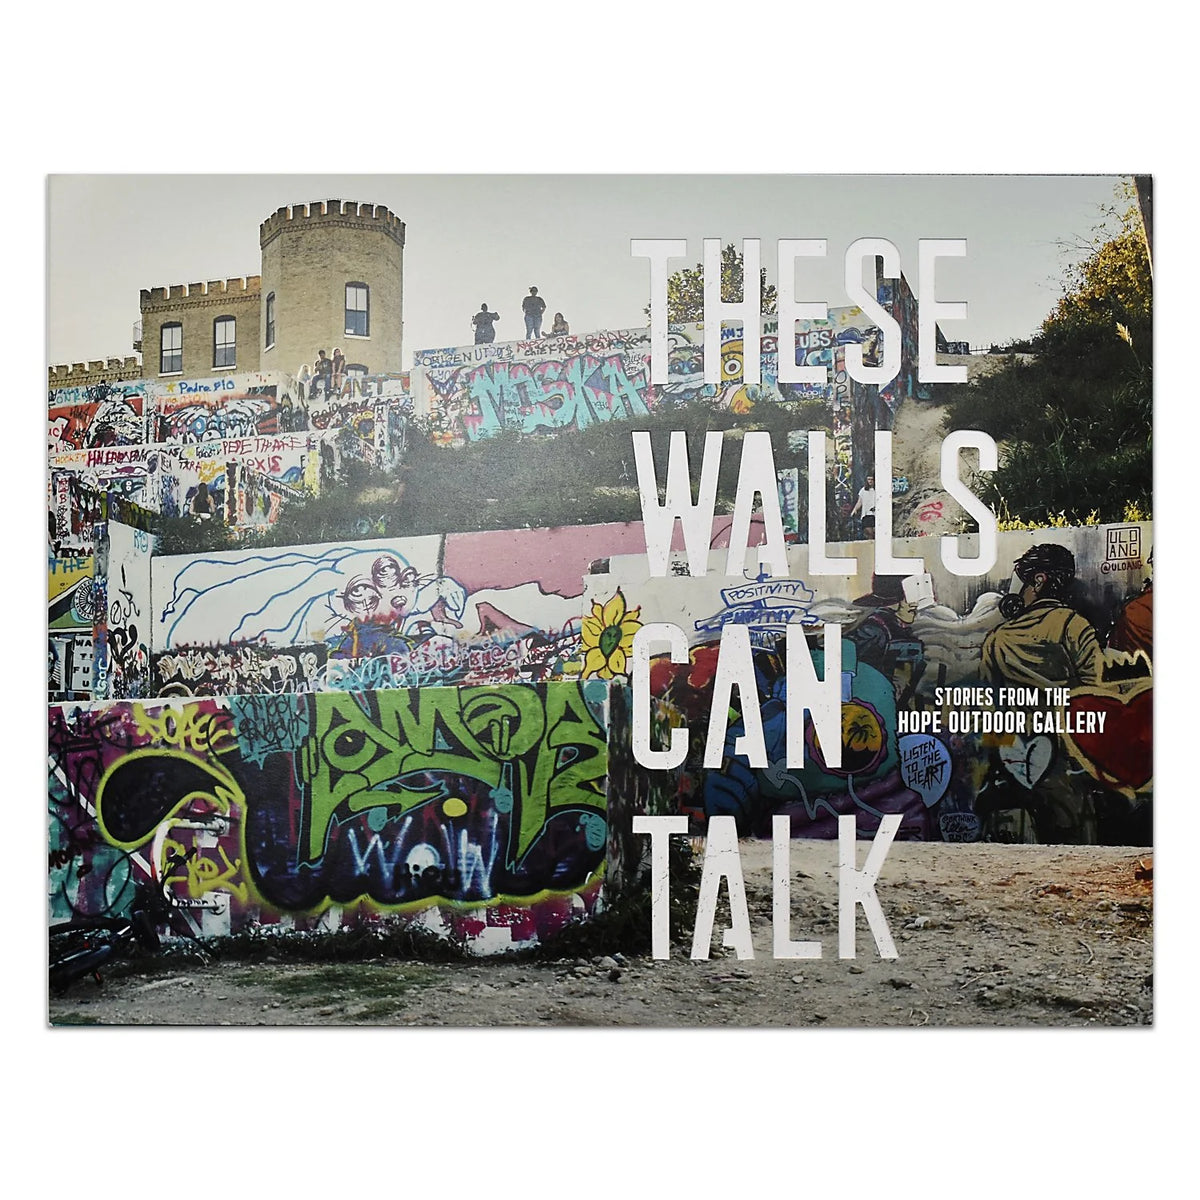 These Walls Can Talk